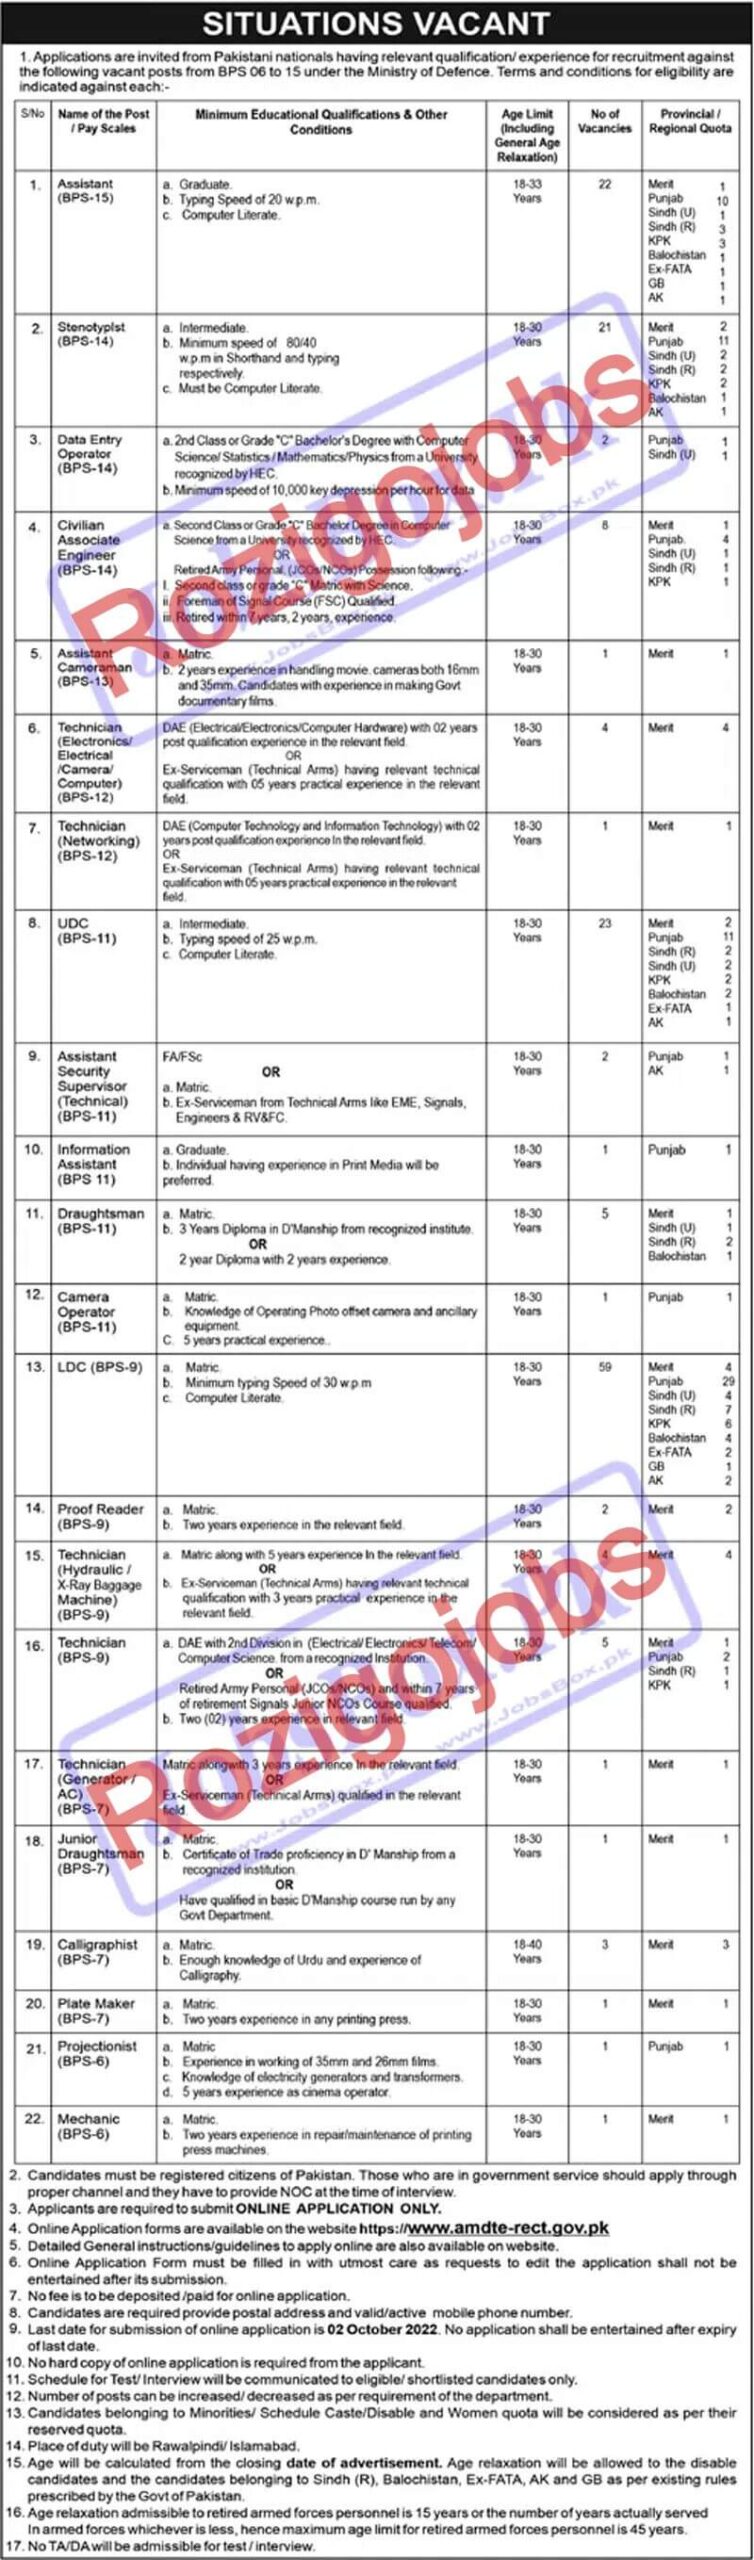 Jobs of ministry of defence